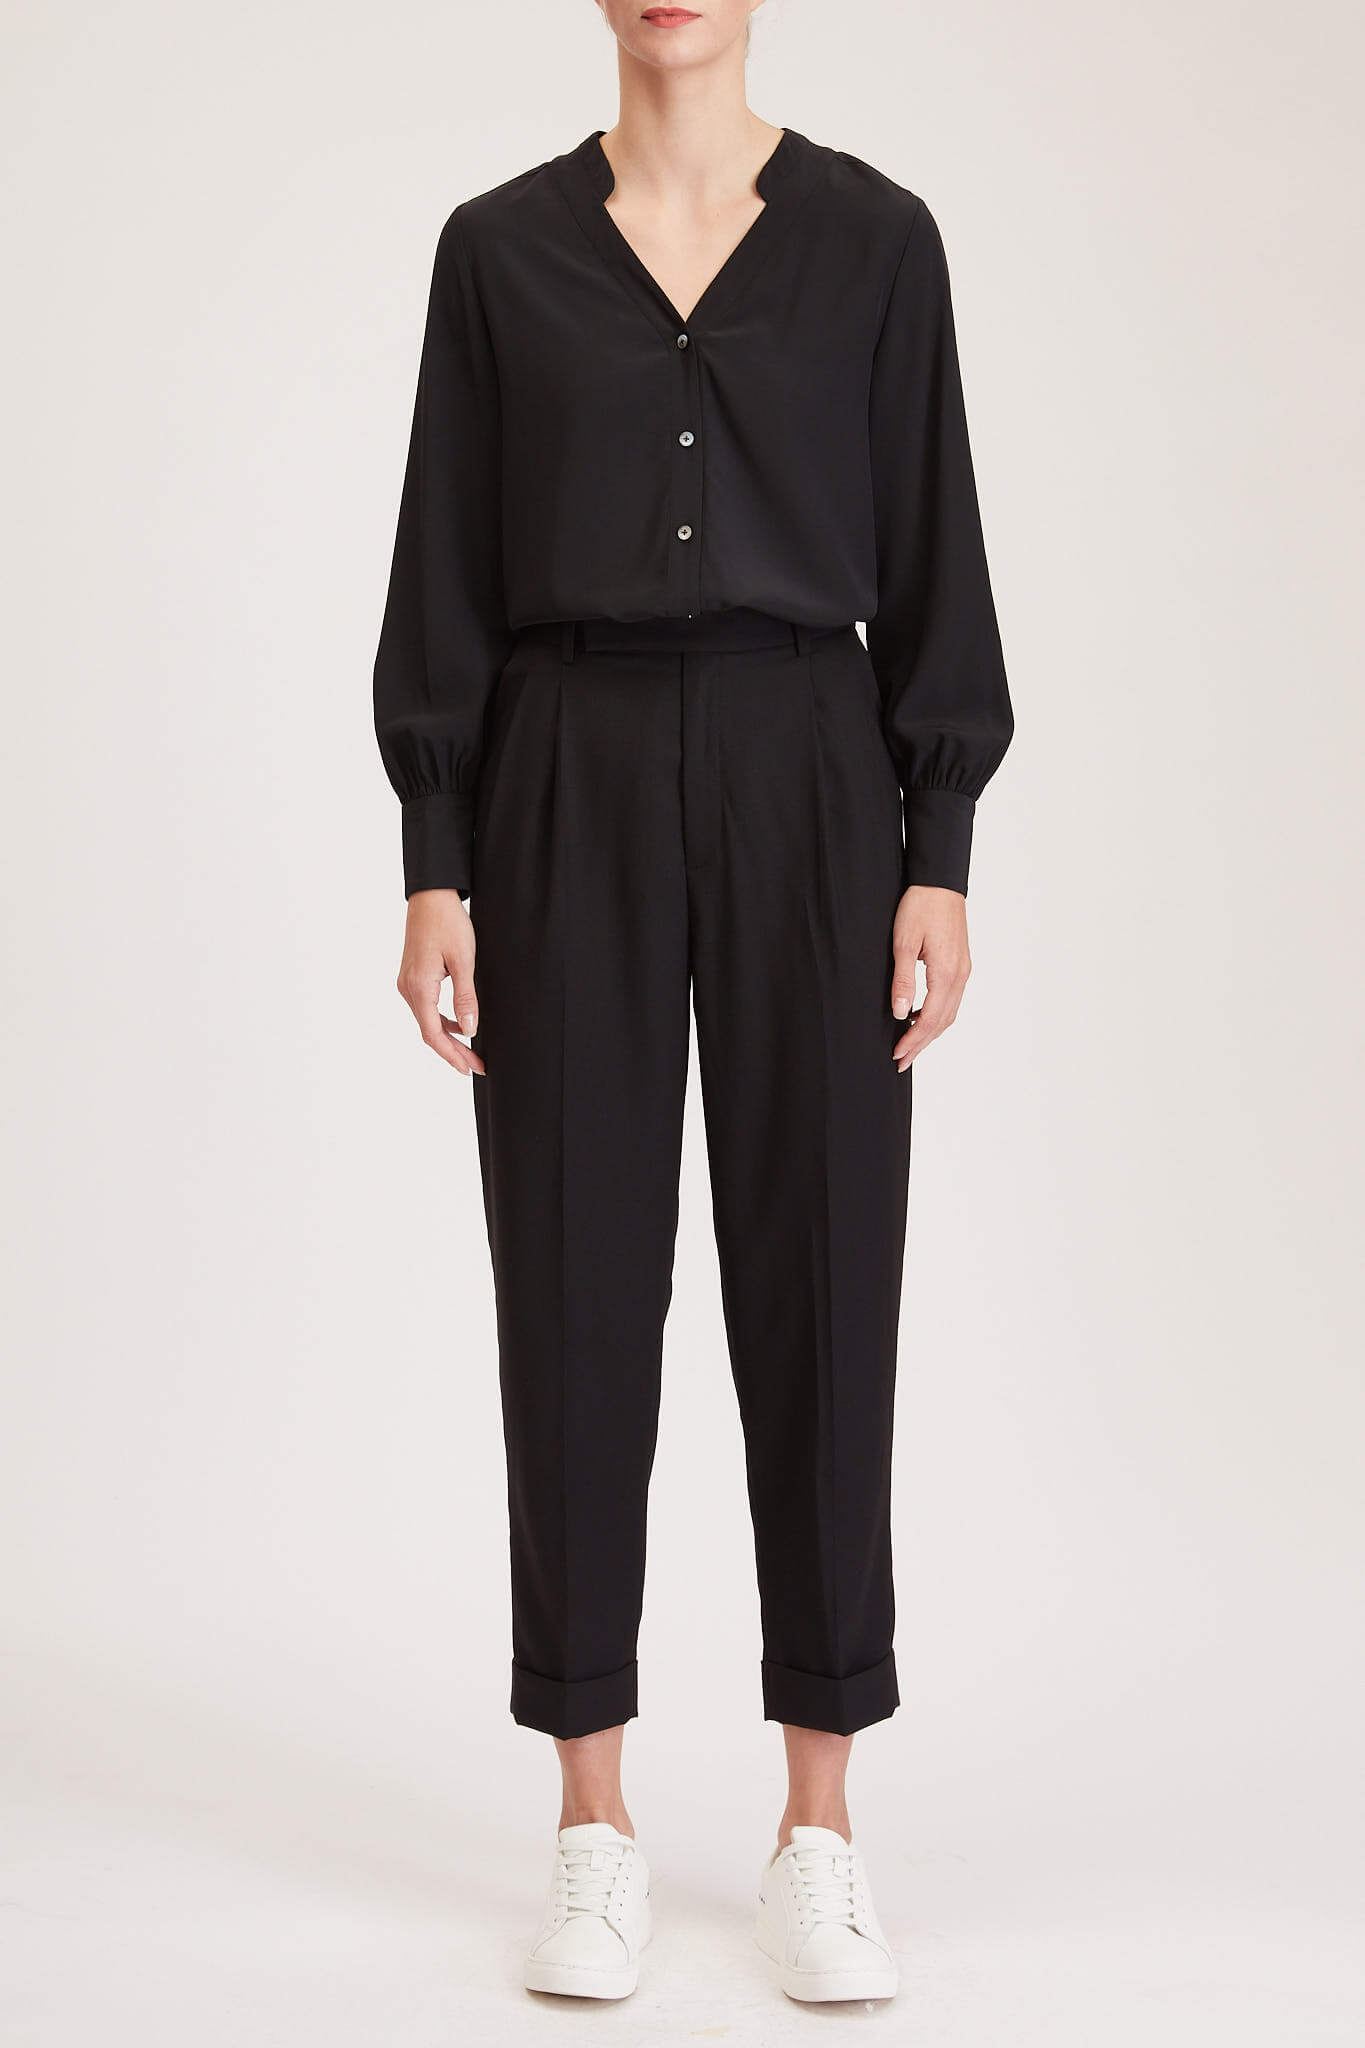 Southampton Trouser – High waisted pleated trousers in black crepe